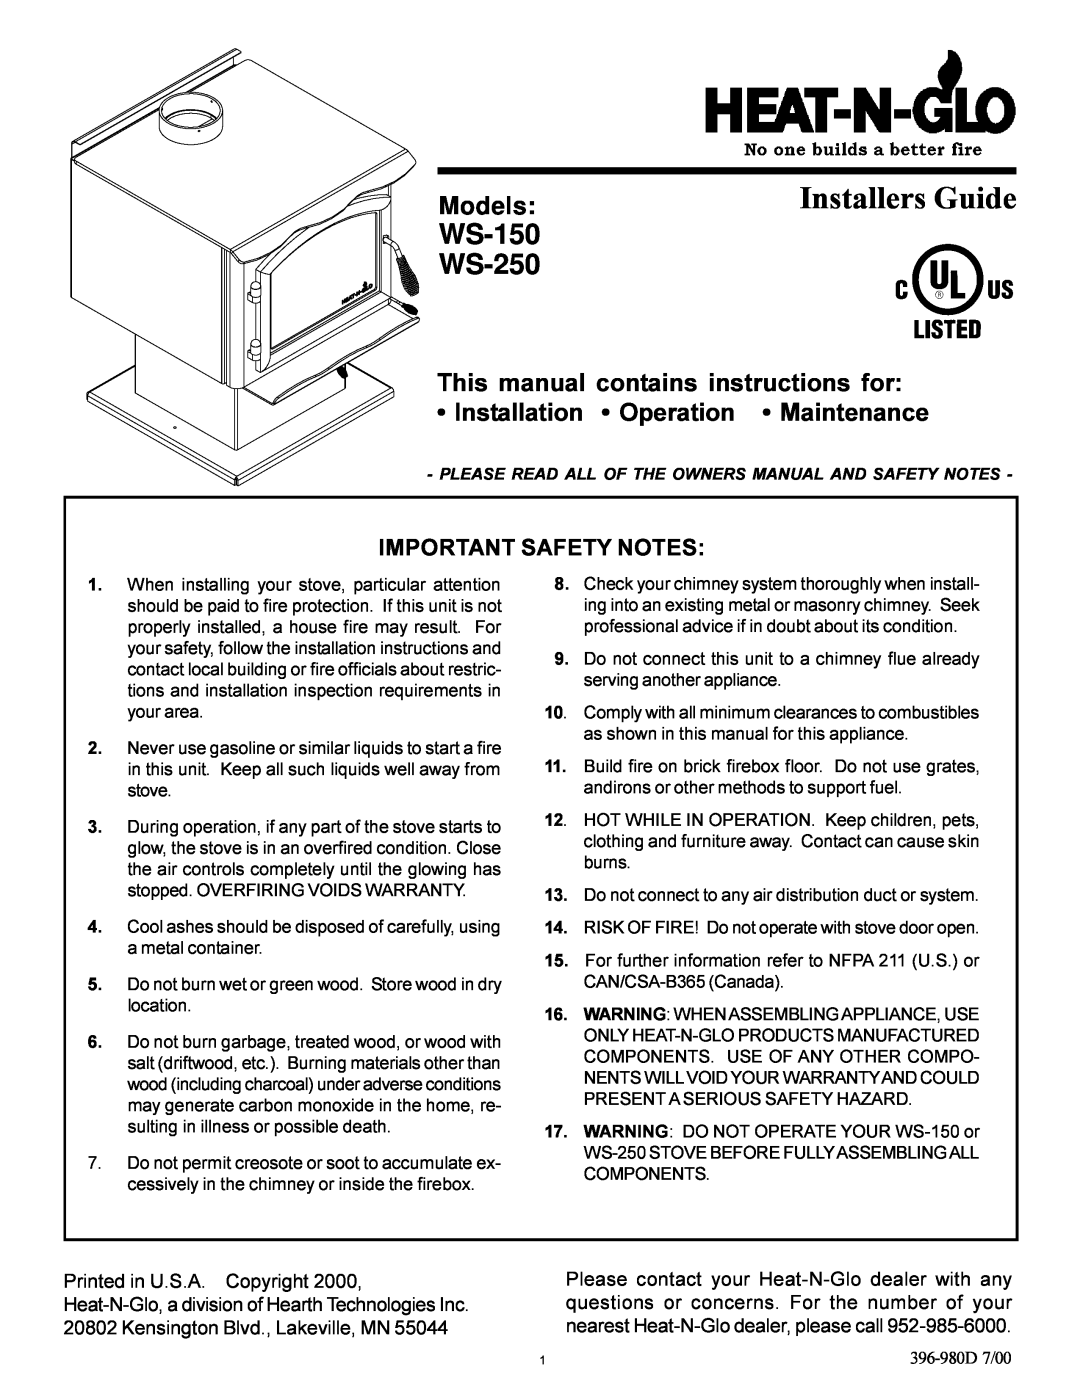 Heat & Glo LifeStyle WS-250 installation instructions Models, This manual contains instructions for, Installers Guide 